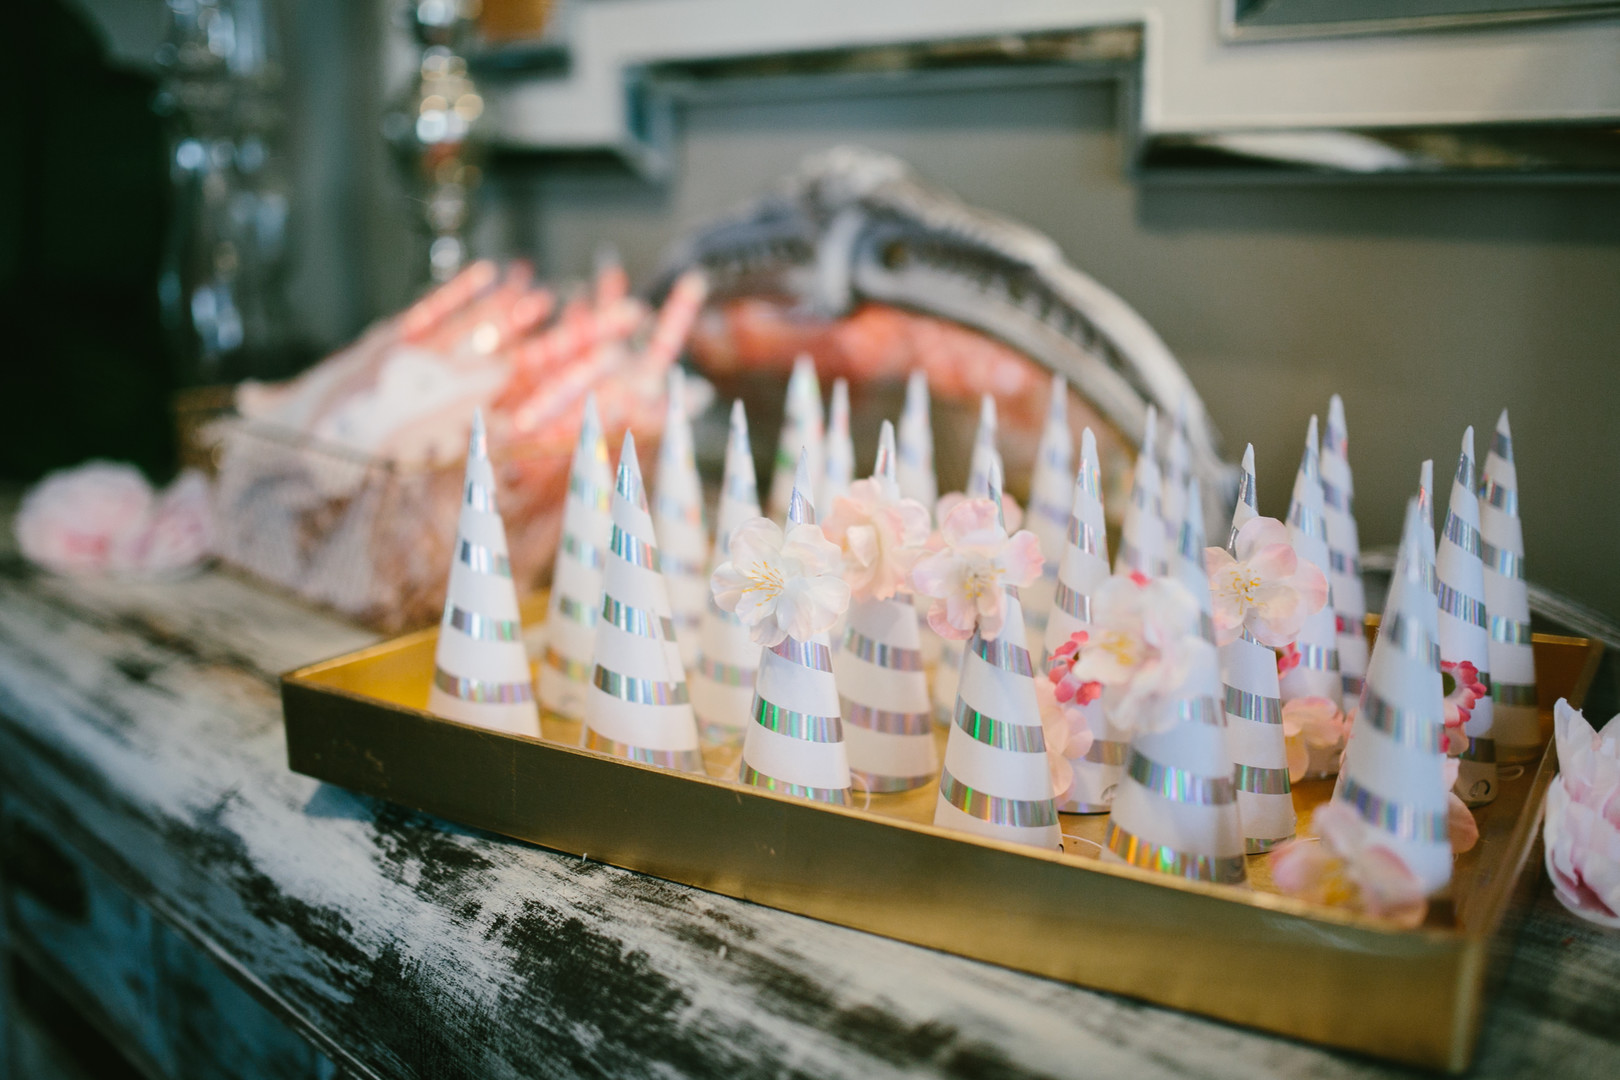 Searching for ideas for a girl's unicorn birthday party theme? You'll love these magical ideas for decorations, games, favors, activities, cupcakes, the cake and more! #unicorn #unicornparty #birthdayparty #partyideas